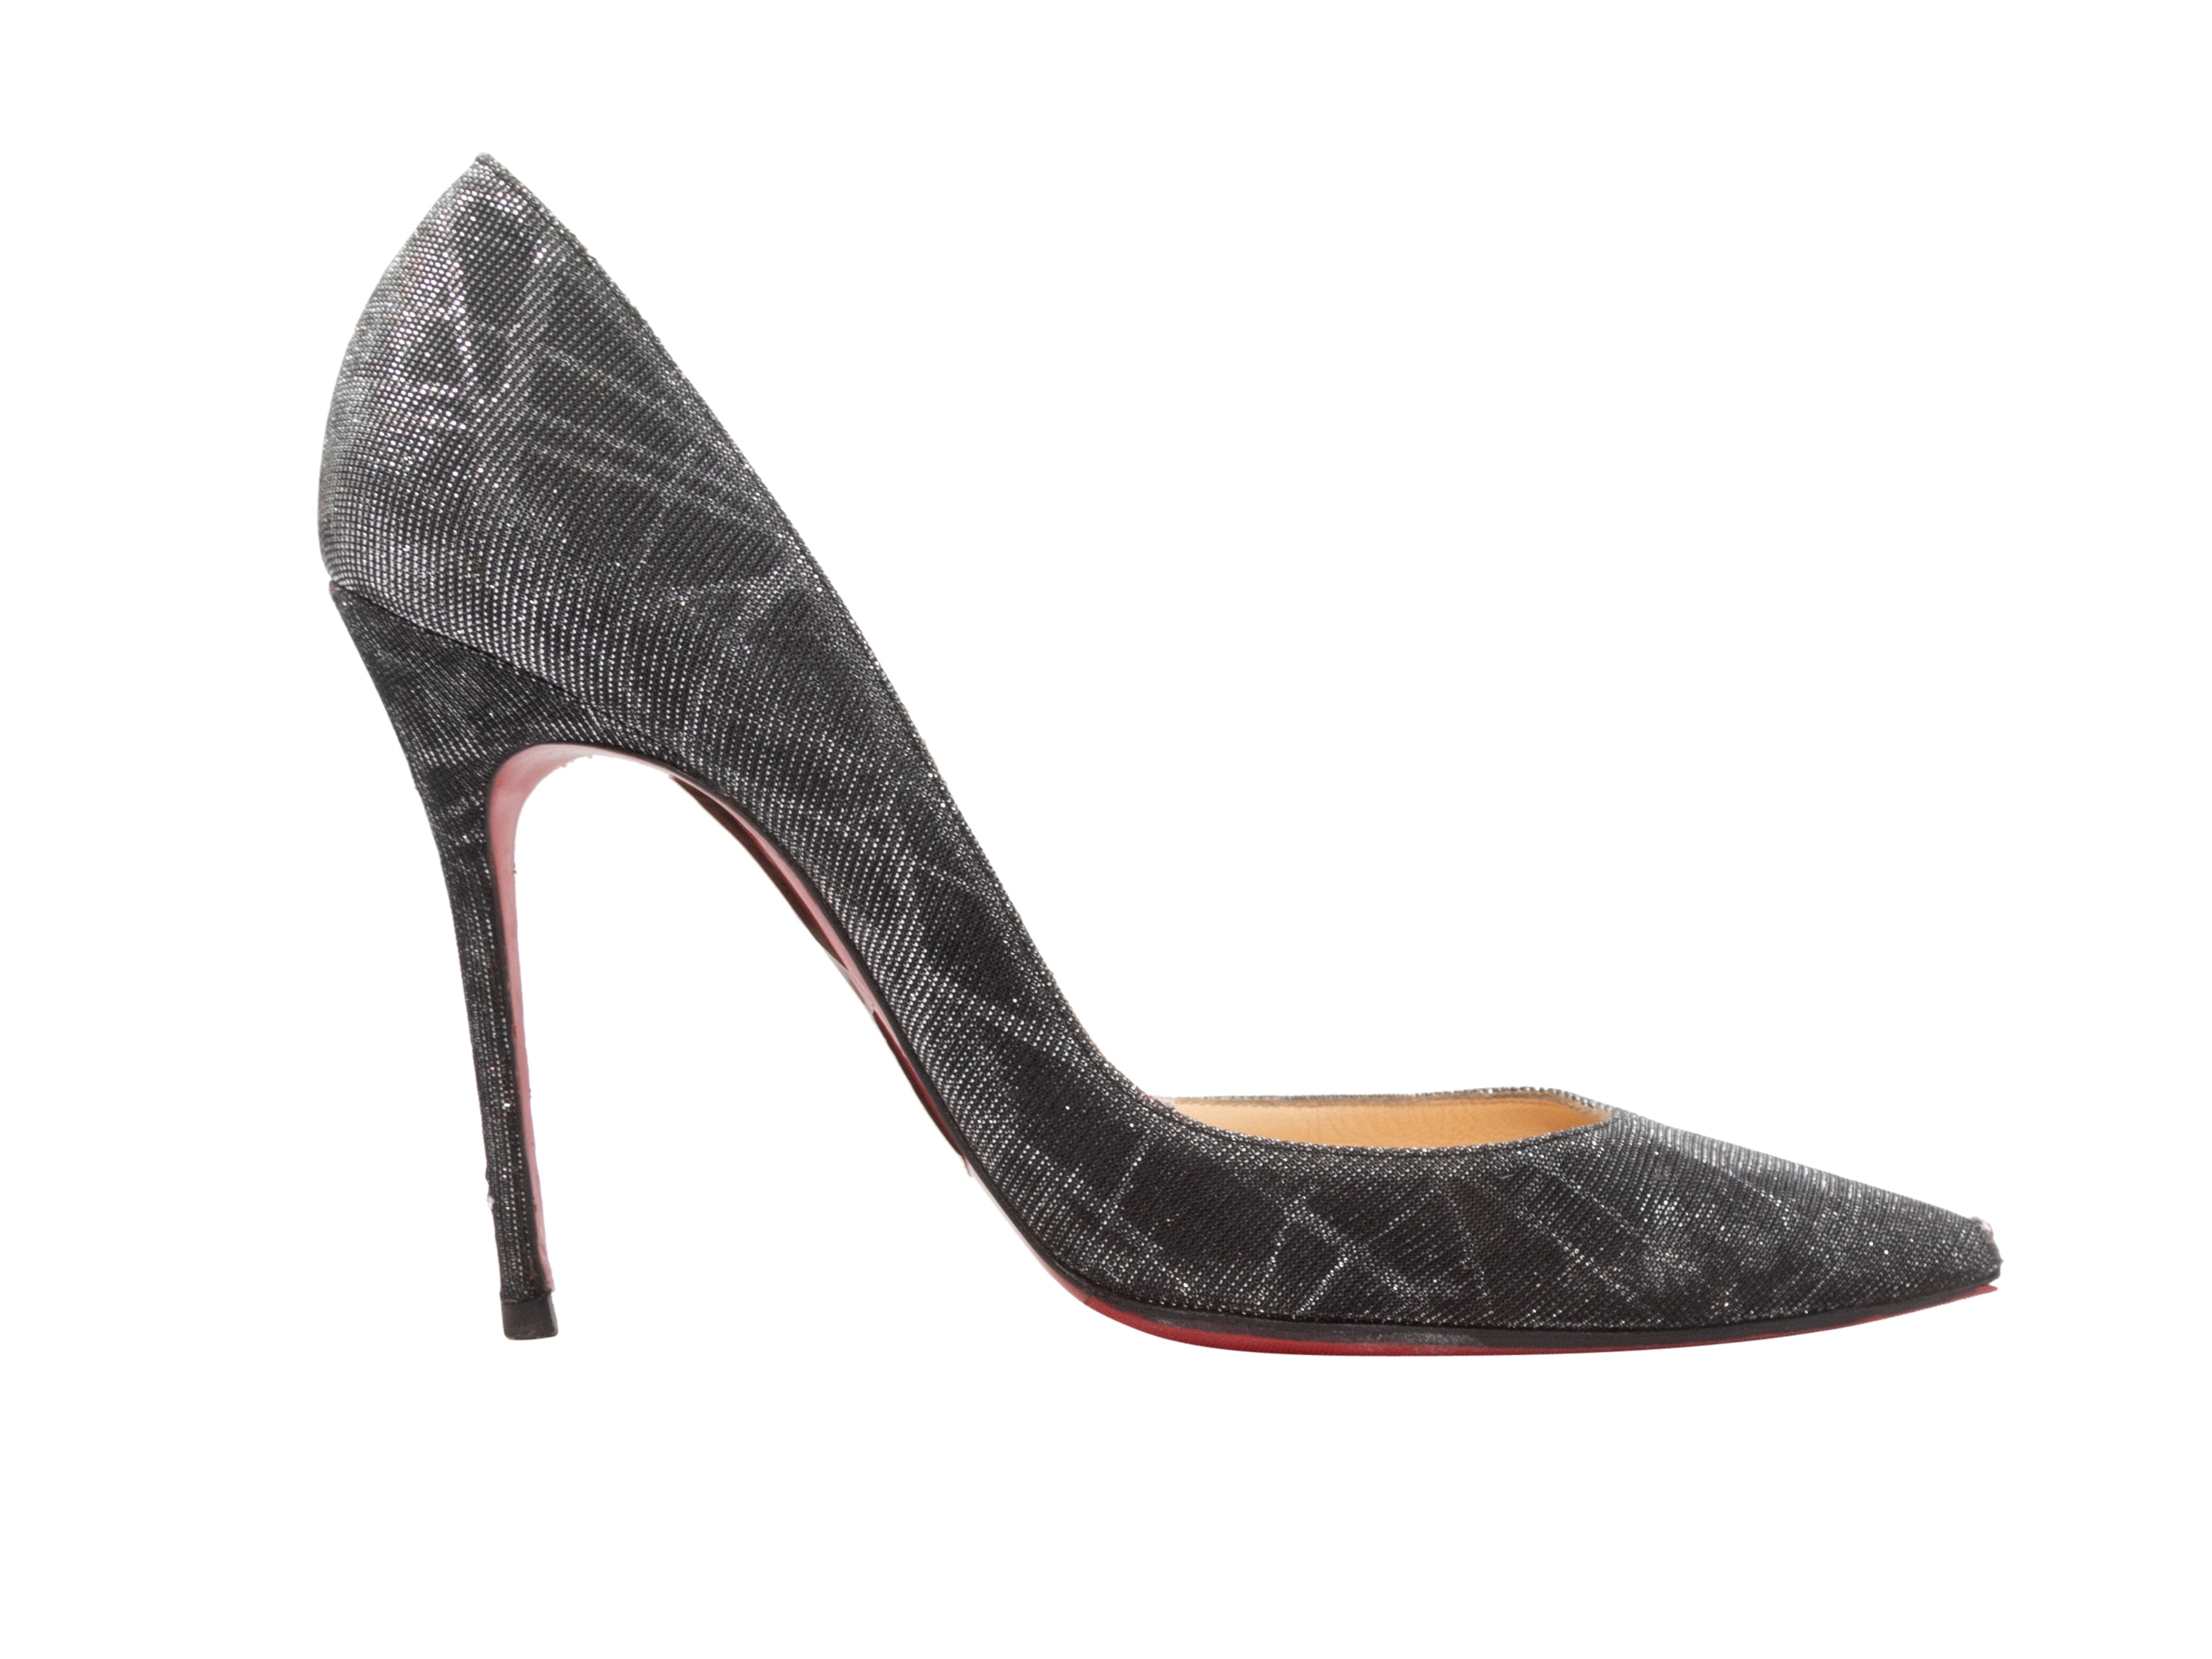 Black & Silver Christian Louboutin Pointed-Toe Pumps Size 38